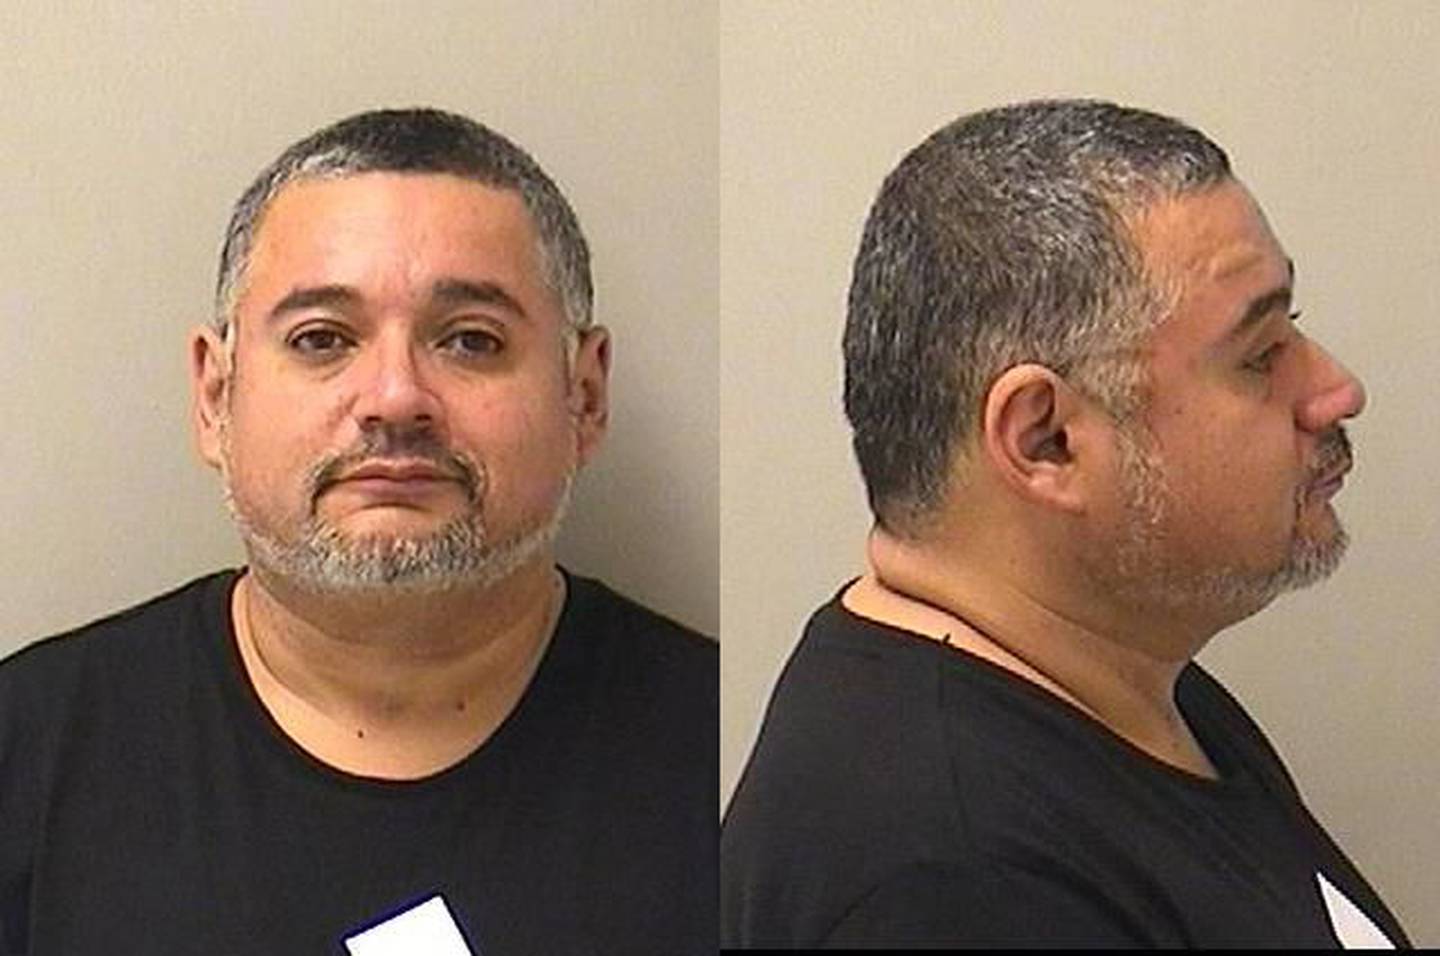 Mark D. Beltran was charged with three counts of felony burglary without causing damage, three counts of theft of property valued at less than $500, but with prior convictions and two counts of unlawful possession of a credit or debit card.